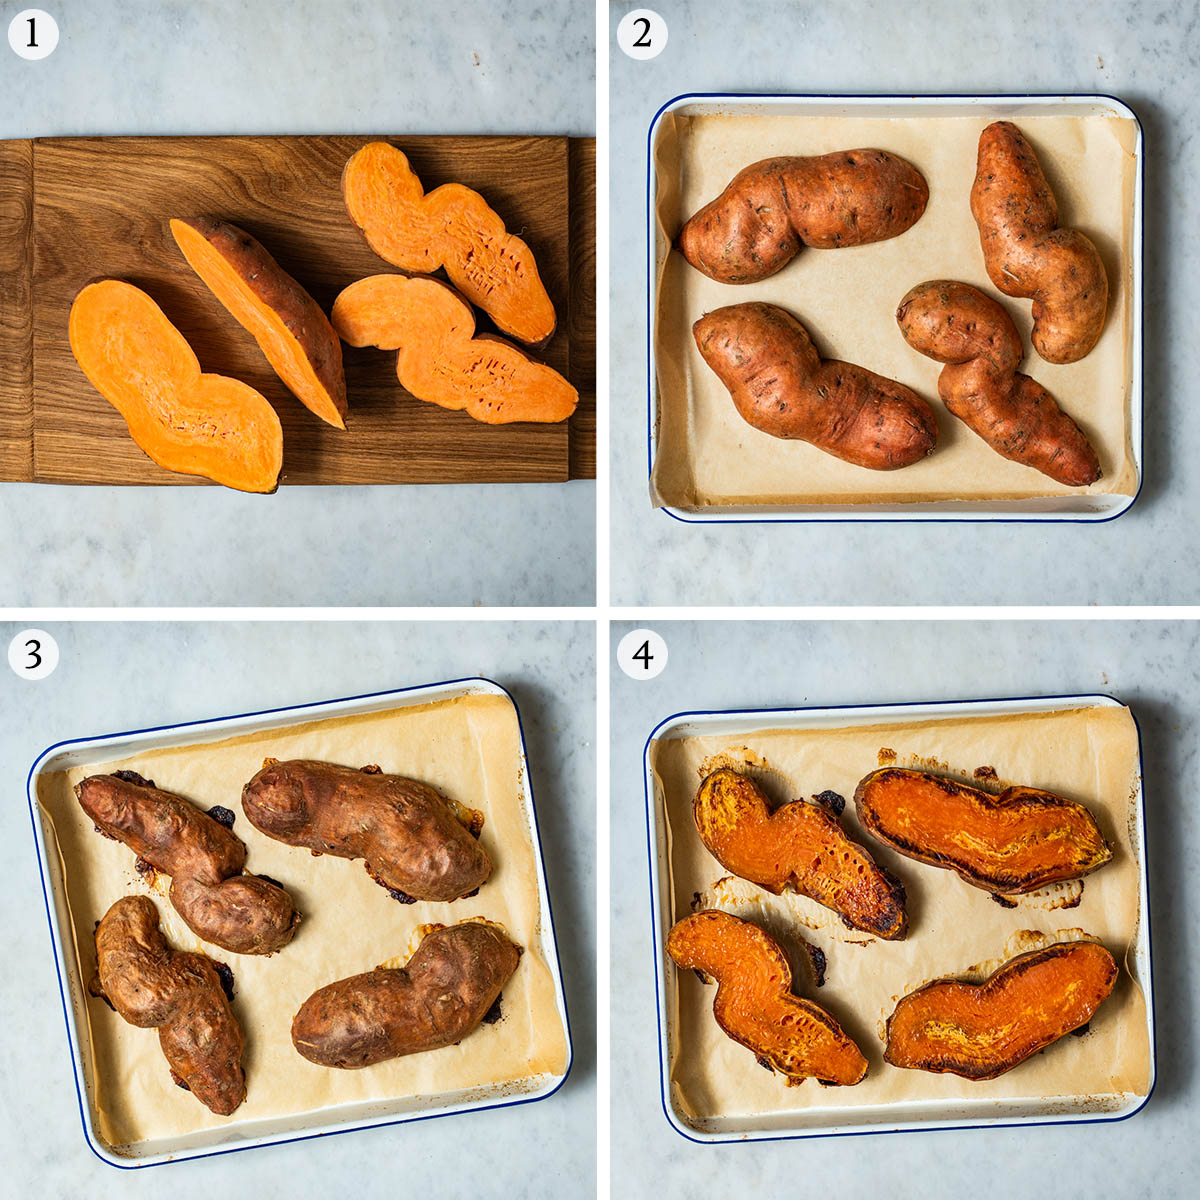 Sweet potatoes steps 1 to 4, halving and before and after cooking.